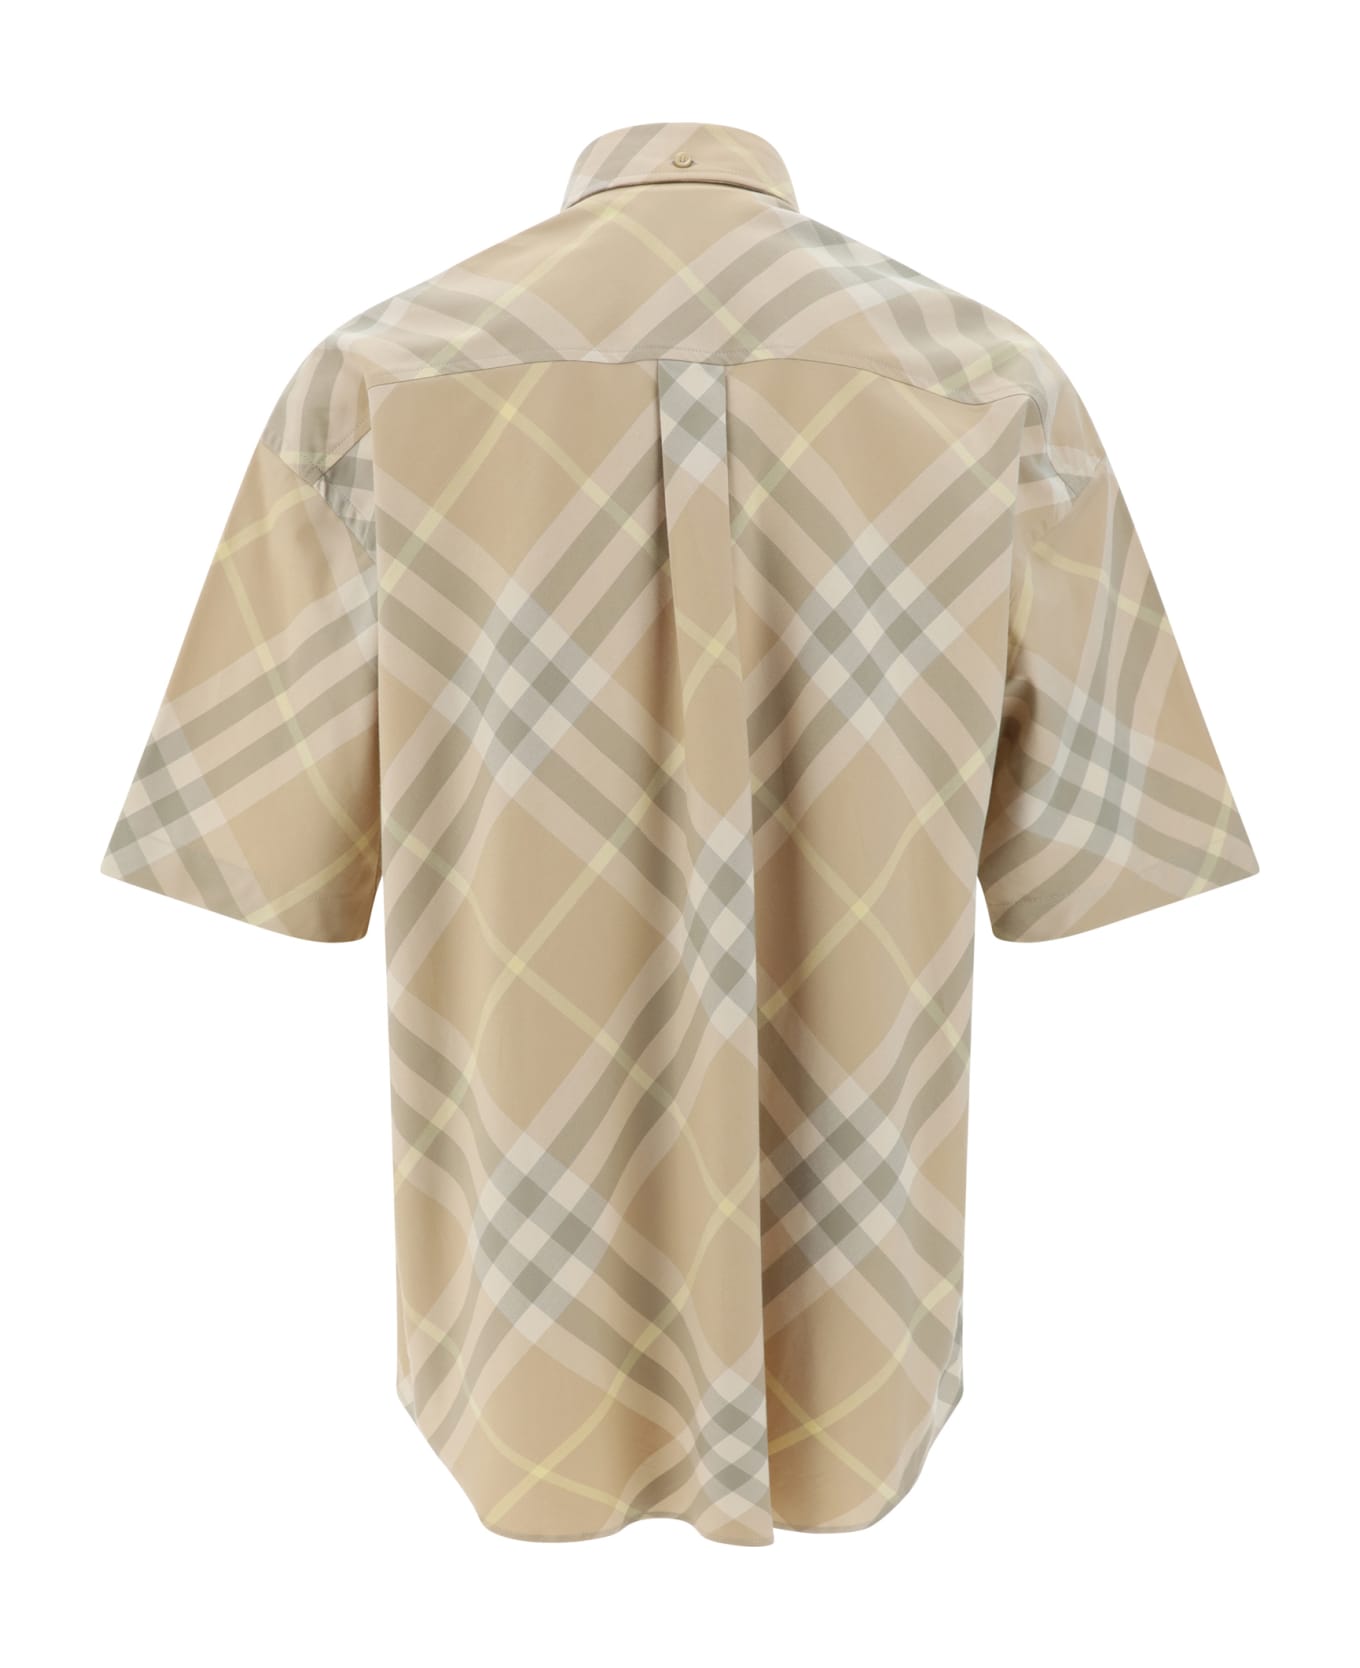 Burberry Casual Shirt - Flax Ip Check